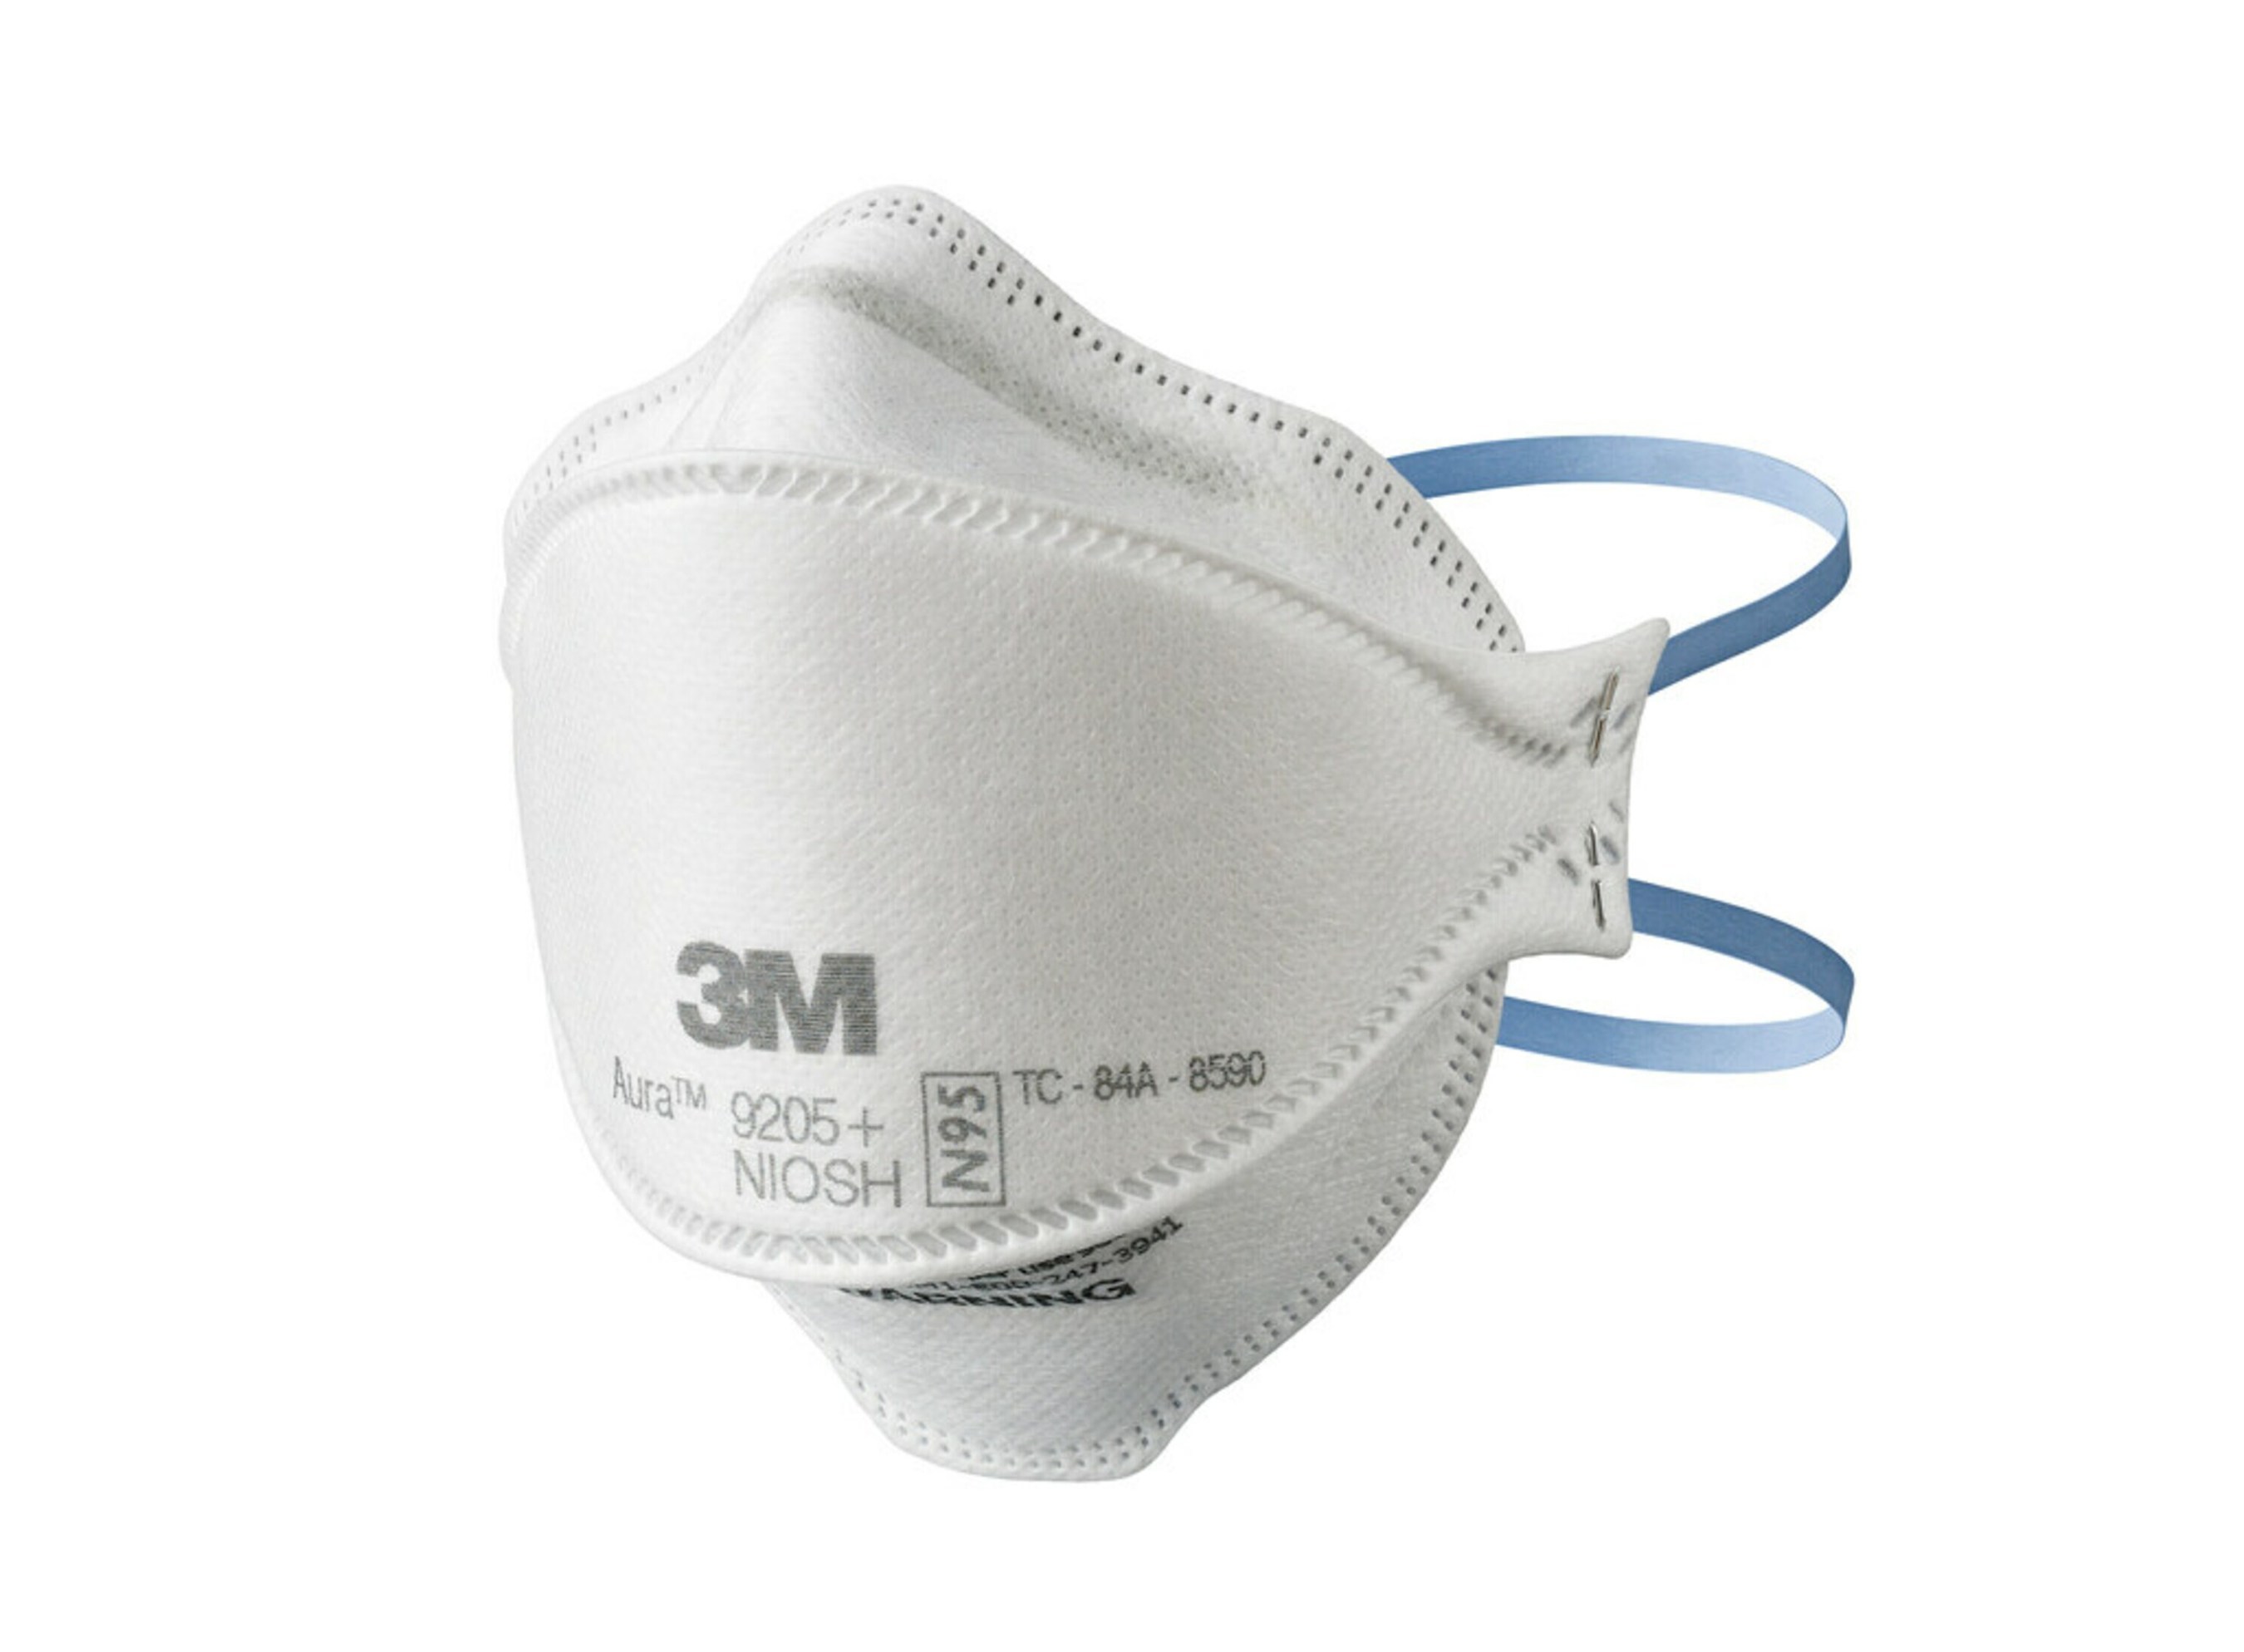 To maximize protection against COVID, use a 3M N95 - Jan 13, 2022